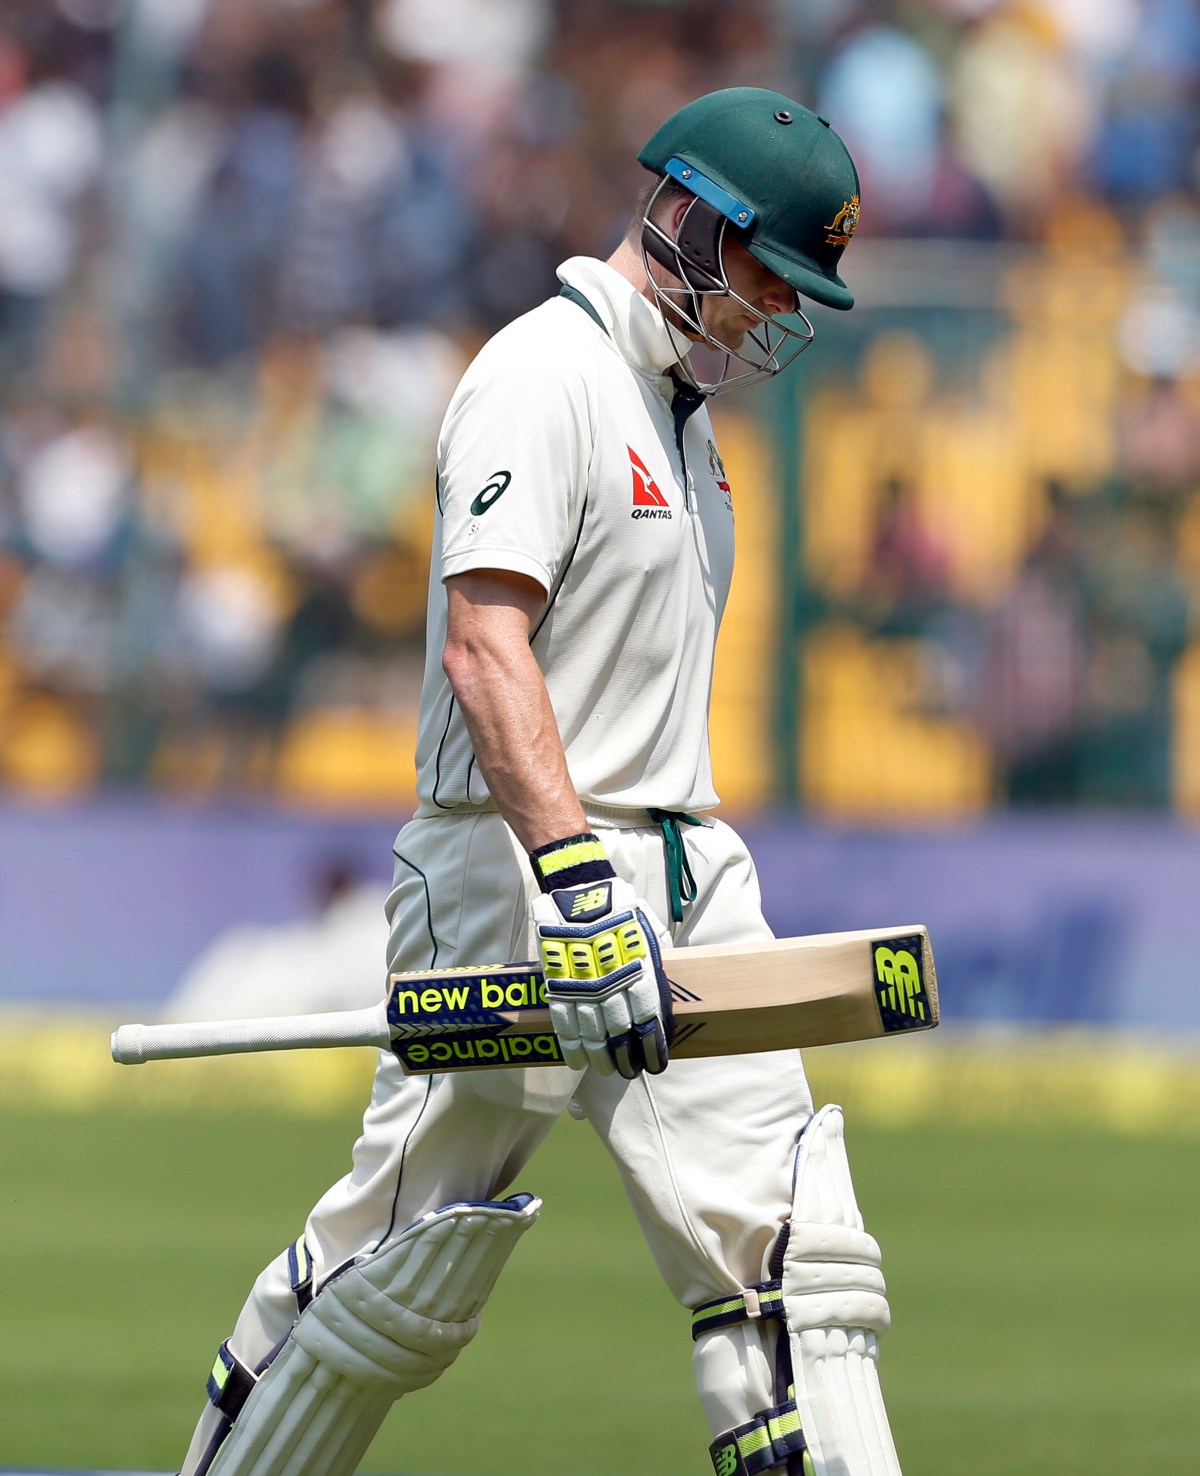 Australia's captain Steven Smith leaves the field after being dismissed during the fourth day of their second test cricket match against India in Bangalore, India, Tuesday, March 7, 2017. (AP Photo/Aijaz Rahi)